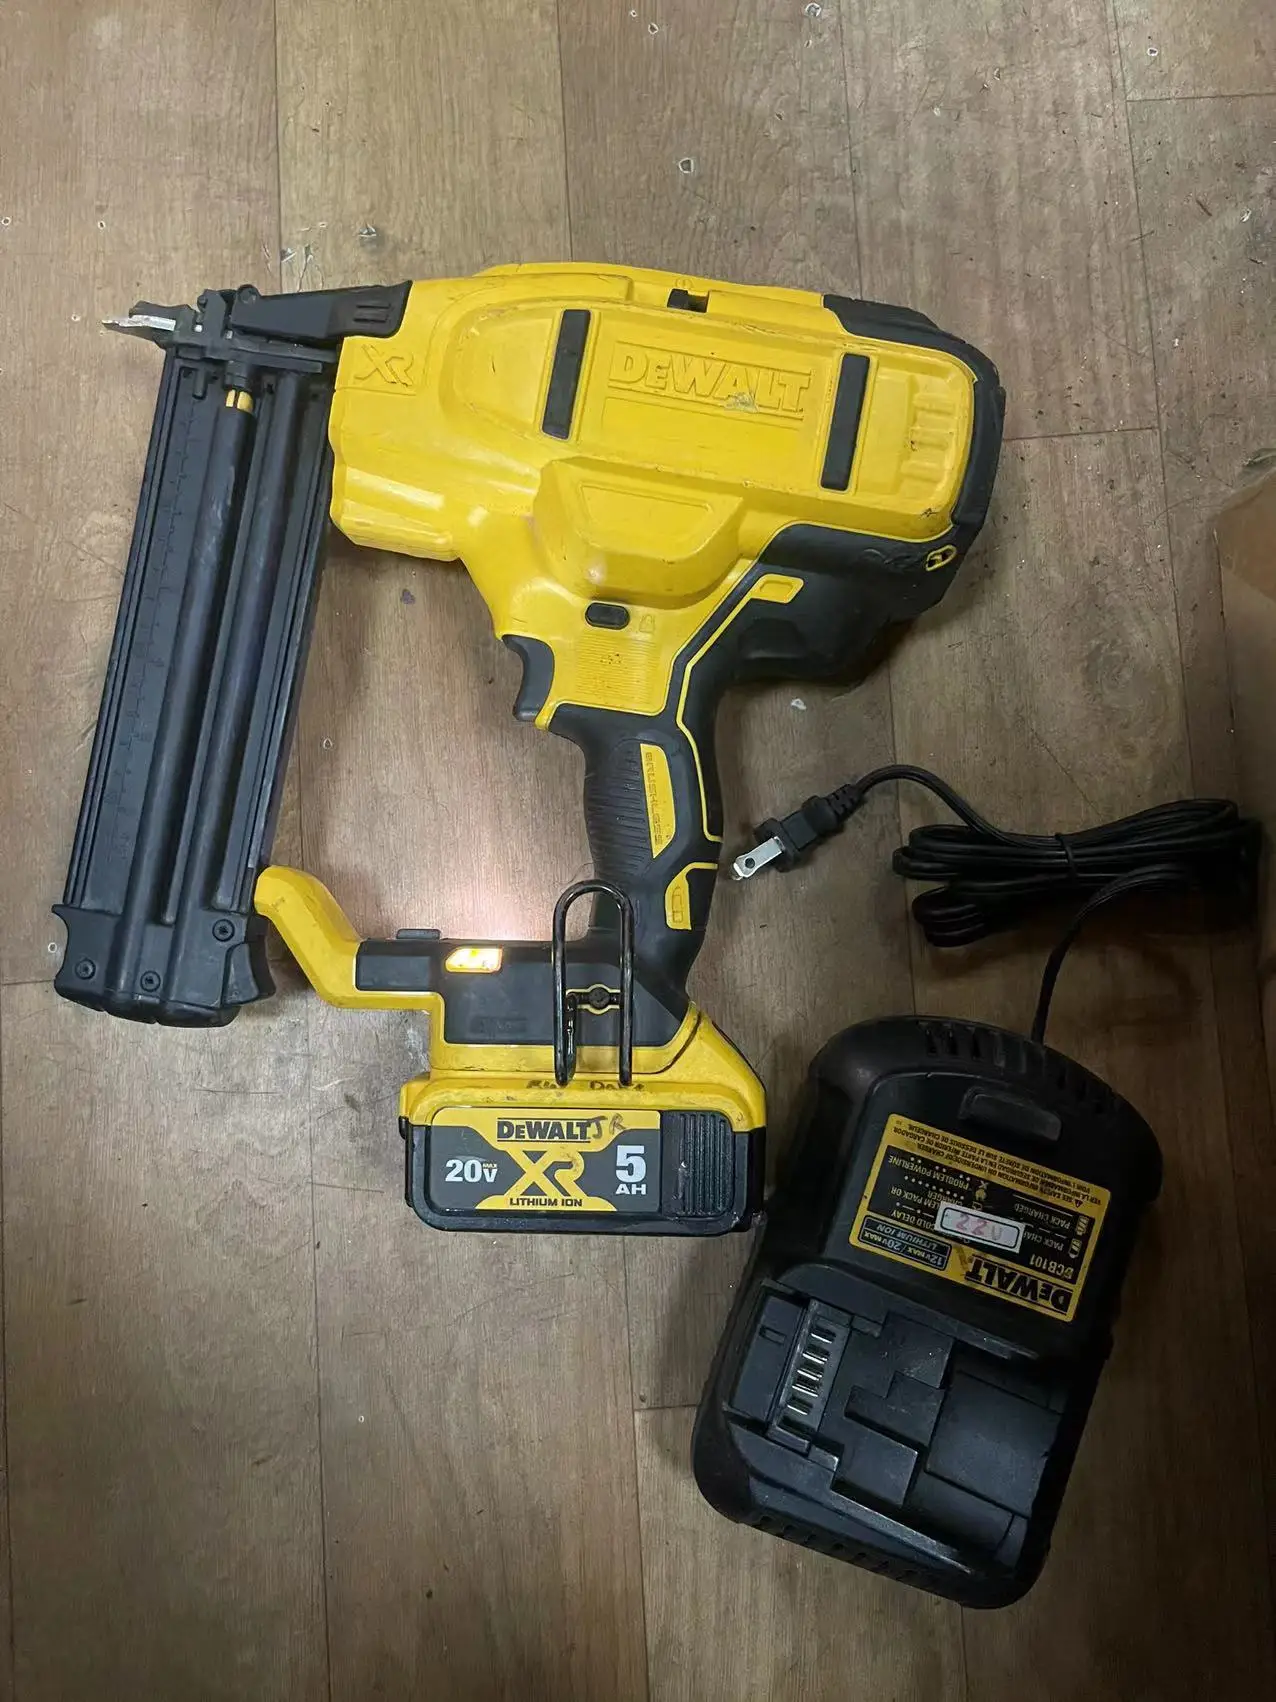 

DEWALT DCN680 20-Volt MAX XR Lith-Ion Cordless 18-Gauge Brad Nailer,WITH 5AMP BATTERY AND CHARGER